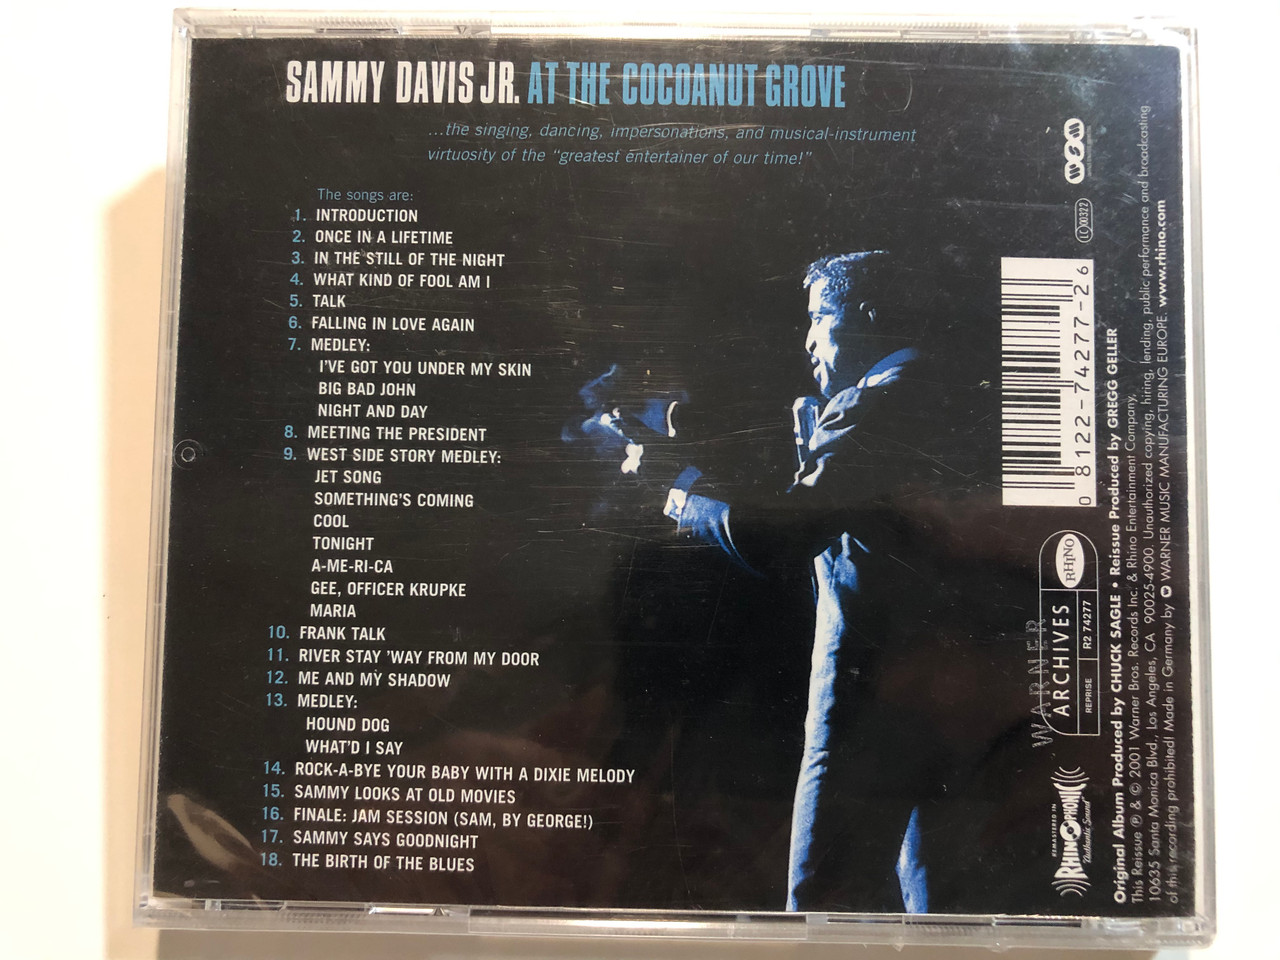 https://cdn10.bigcommerce.com/s-62bdpkt7pb/products/29363/images/175157/Sammy_Davis_Jr._At_The_Cocoanut_Grove_Reissue_of_Hits_Timeless_1963_Album_Featuring_Classic_Live_Renditations_of_West_Side_Story_Medley_In_The_Still_Of_The_Night_What_Kind_Of_Fool_Am___47002.1618429220.1280.1280.JPG?c=2&_ga=2.138964720.2106526039.1618490327-95516592.1618490327